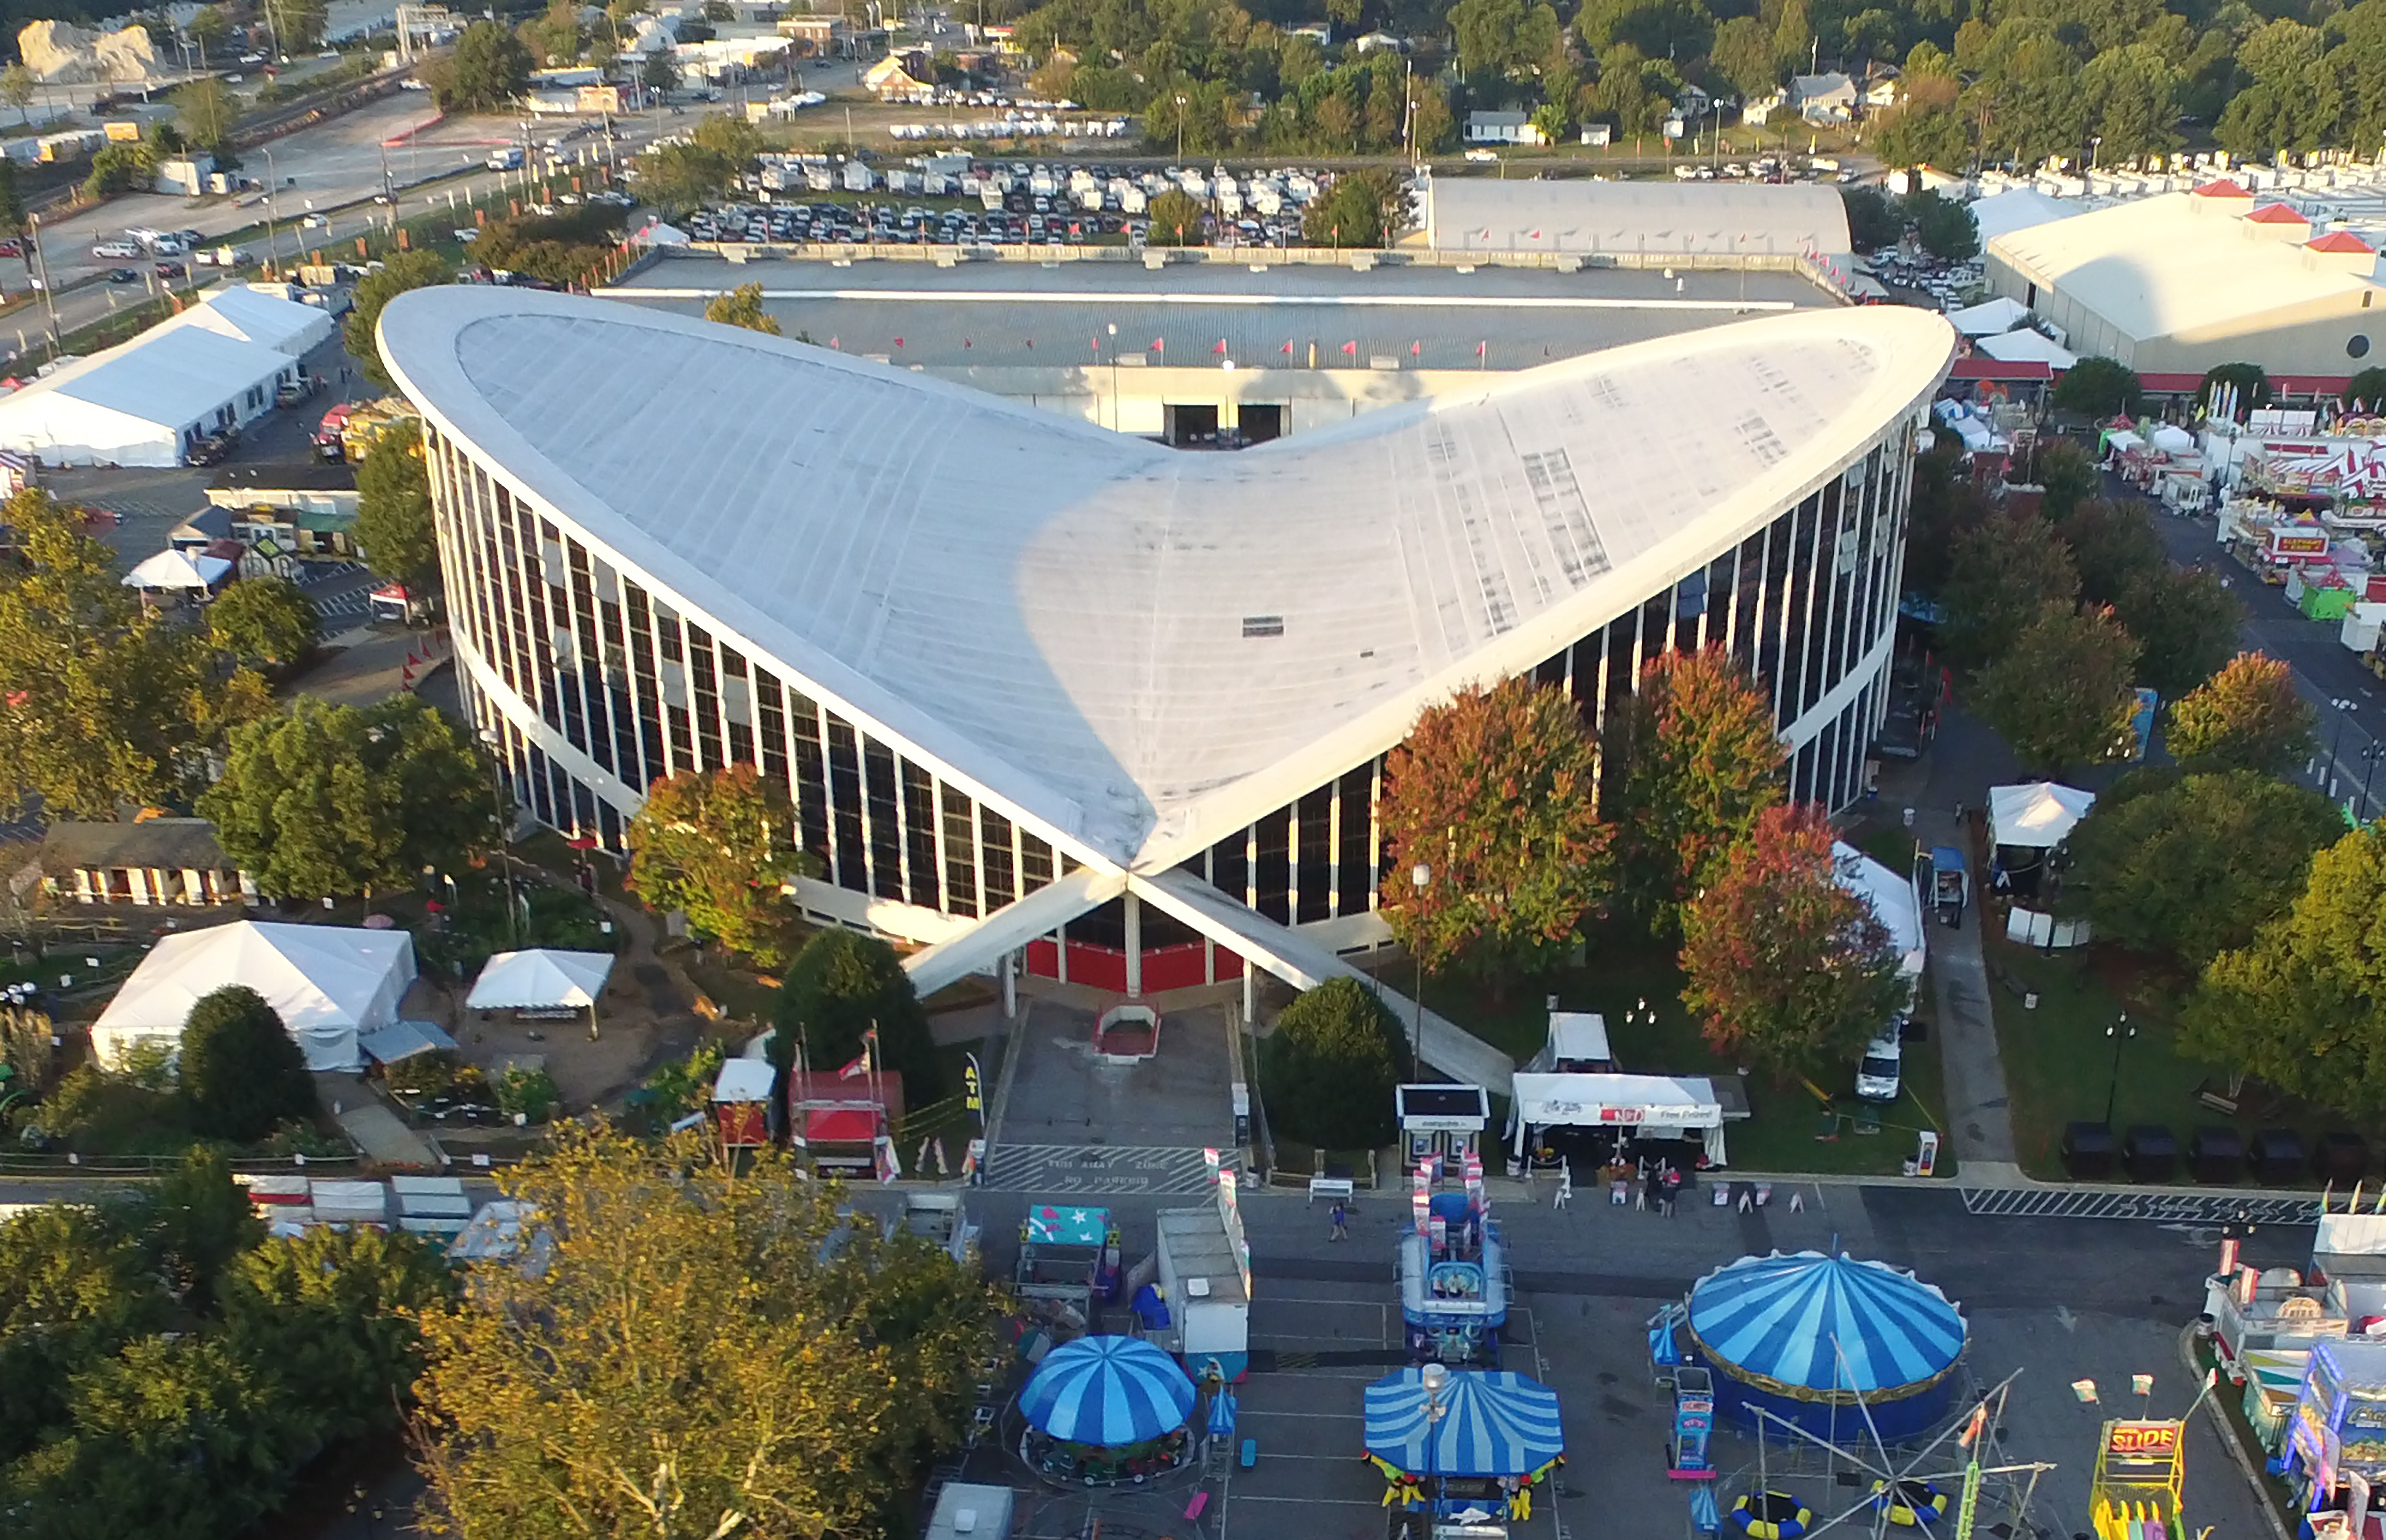 Drone footage of Dorton Area, which has a v-shaped roof. 